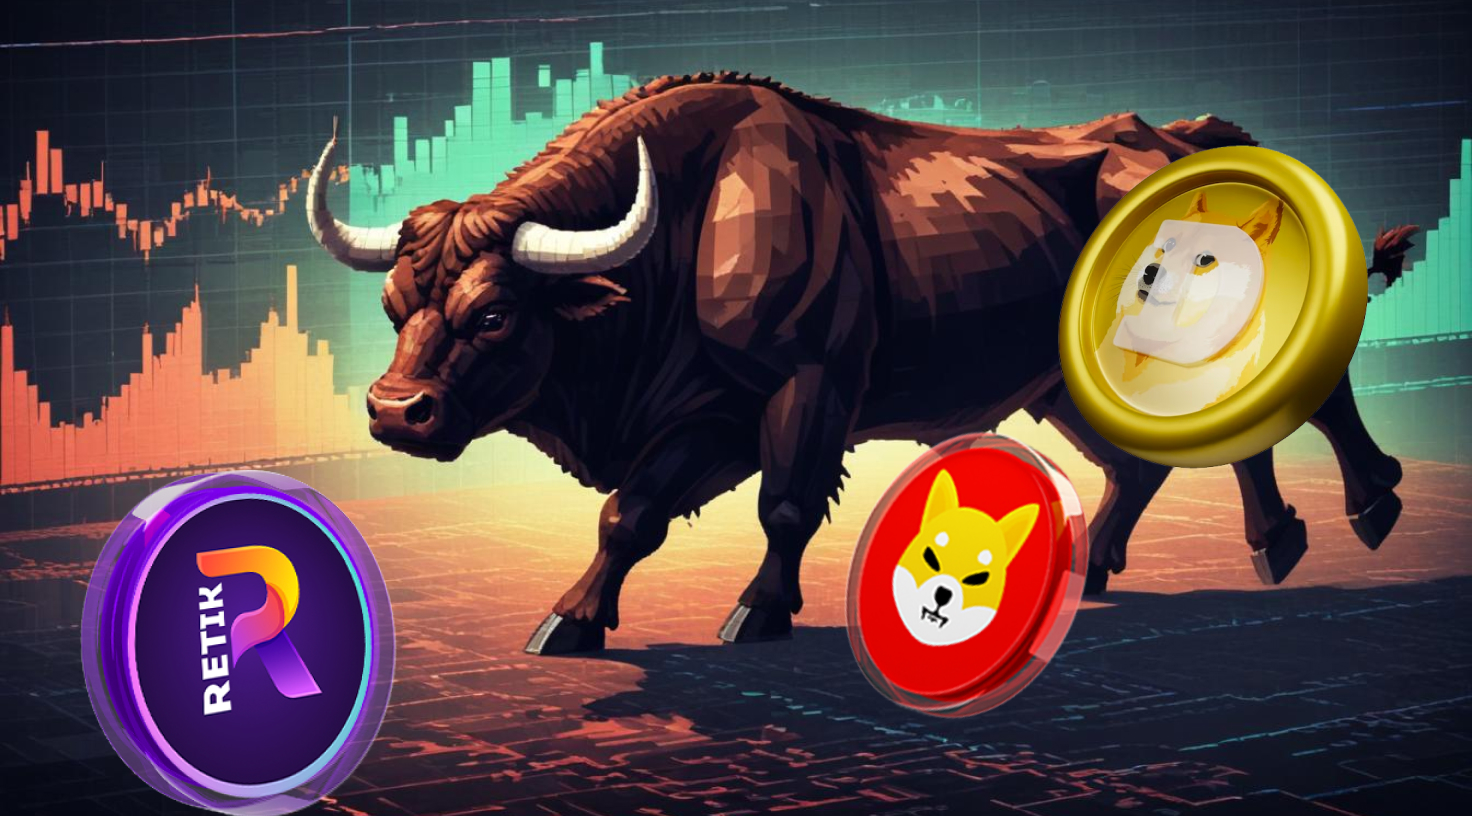 Read more about the article Analyst makes bold price prediction for 2024 bull run, says new cryptocurrency Retik Finance (Retik) will outperform top meme coins Dogecoin (Doge) and Shiba Inu (Shib)